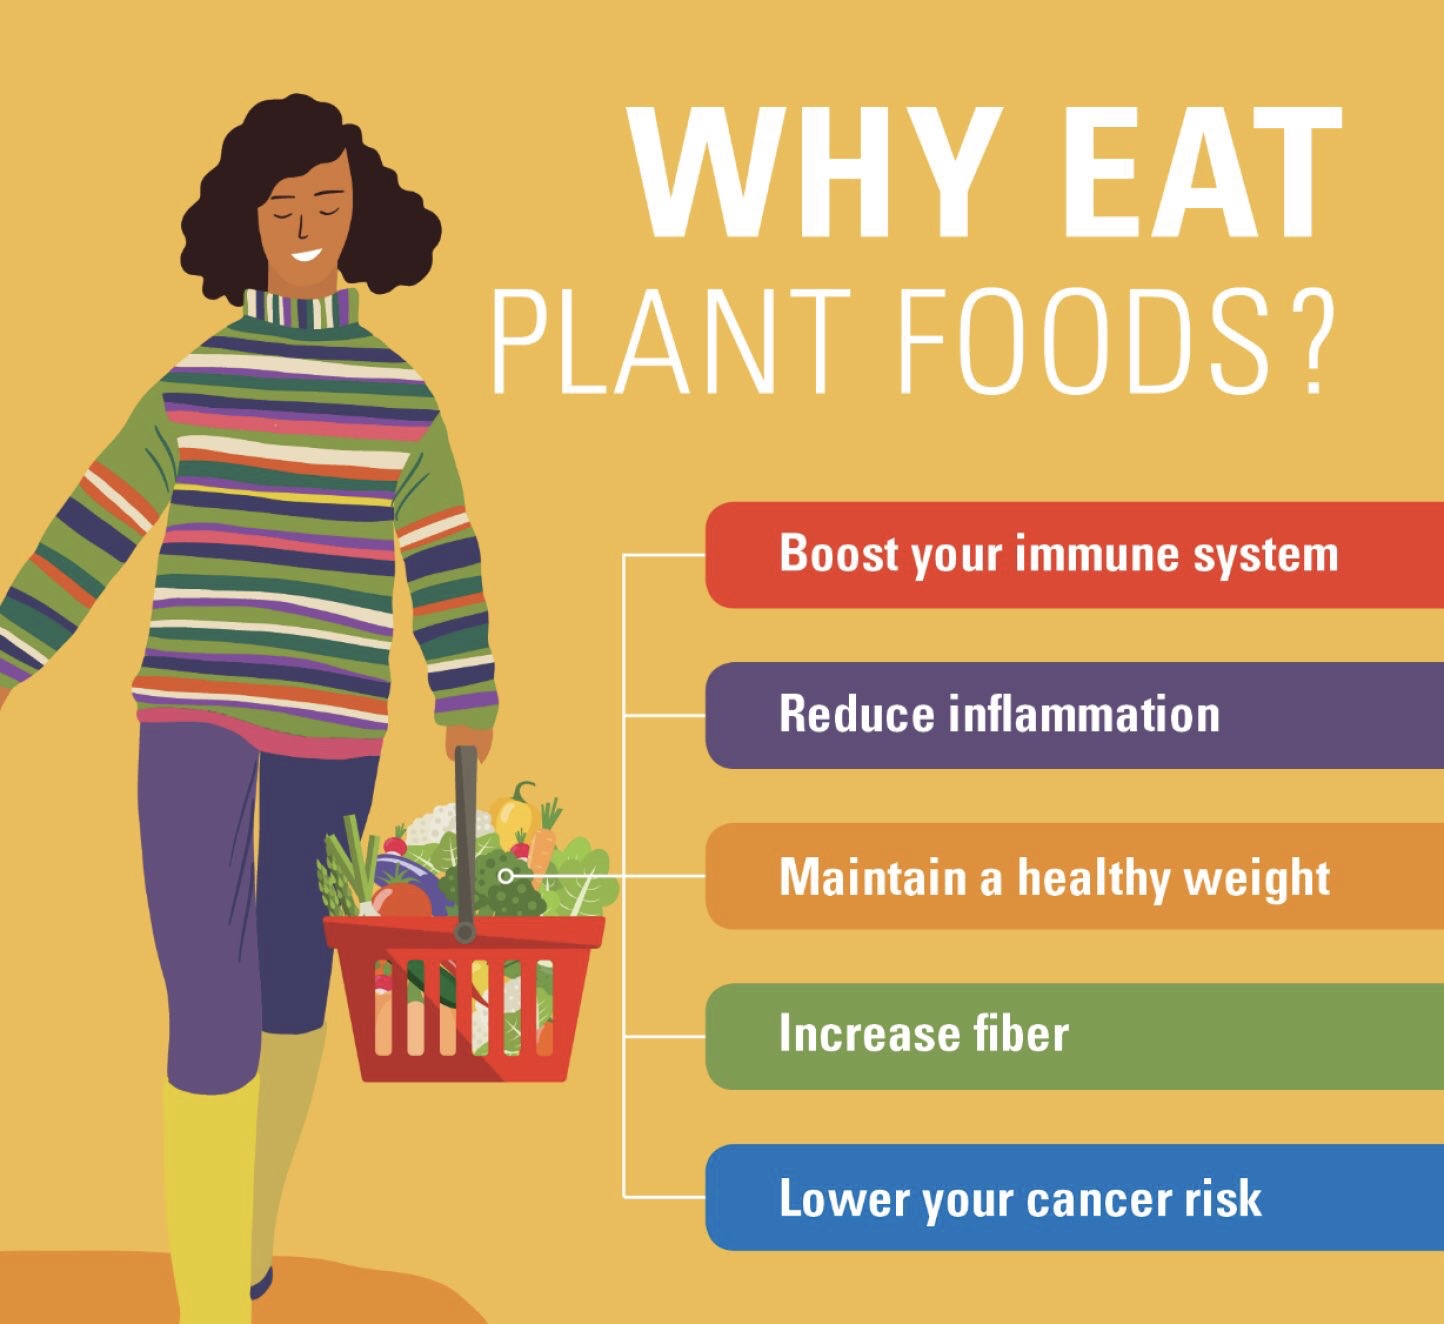 Why Eat Plant Based Foods?